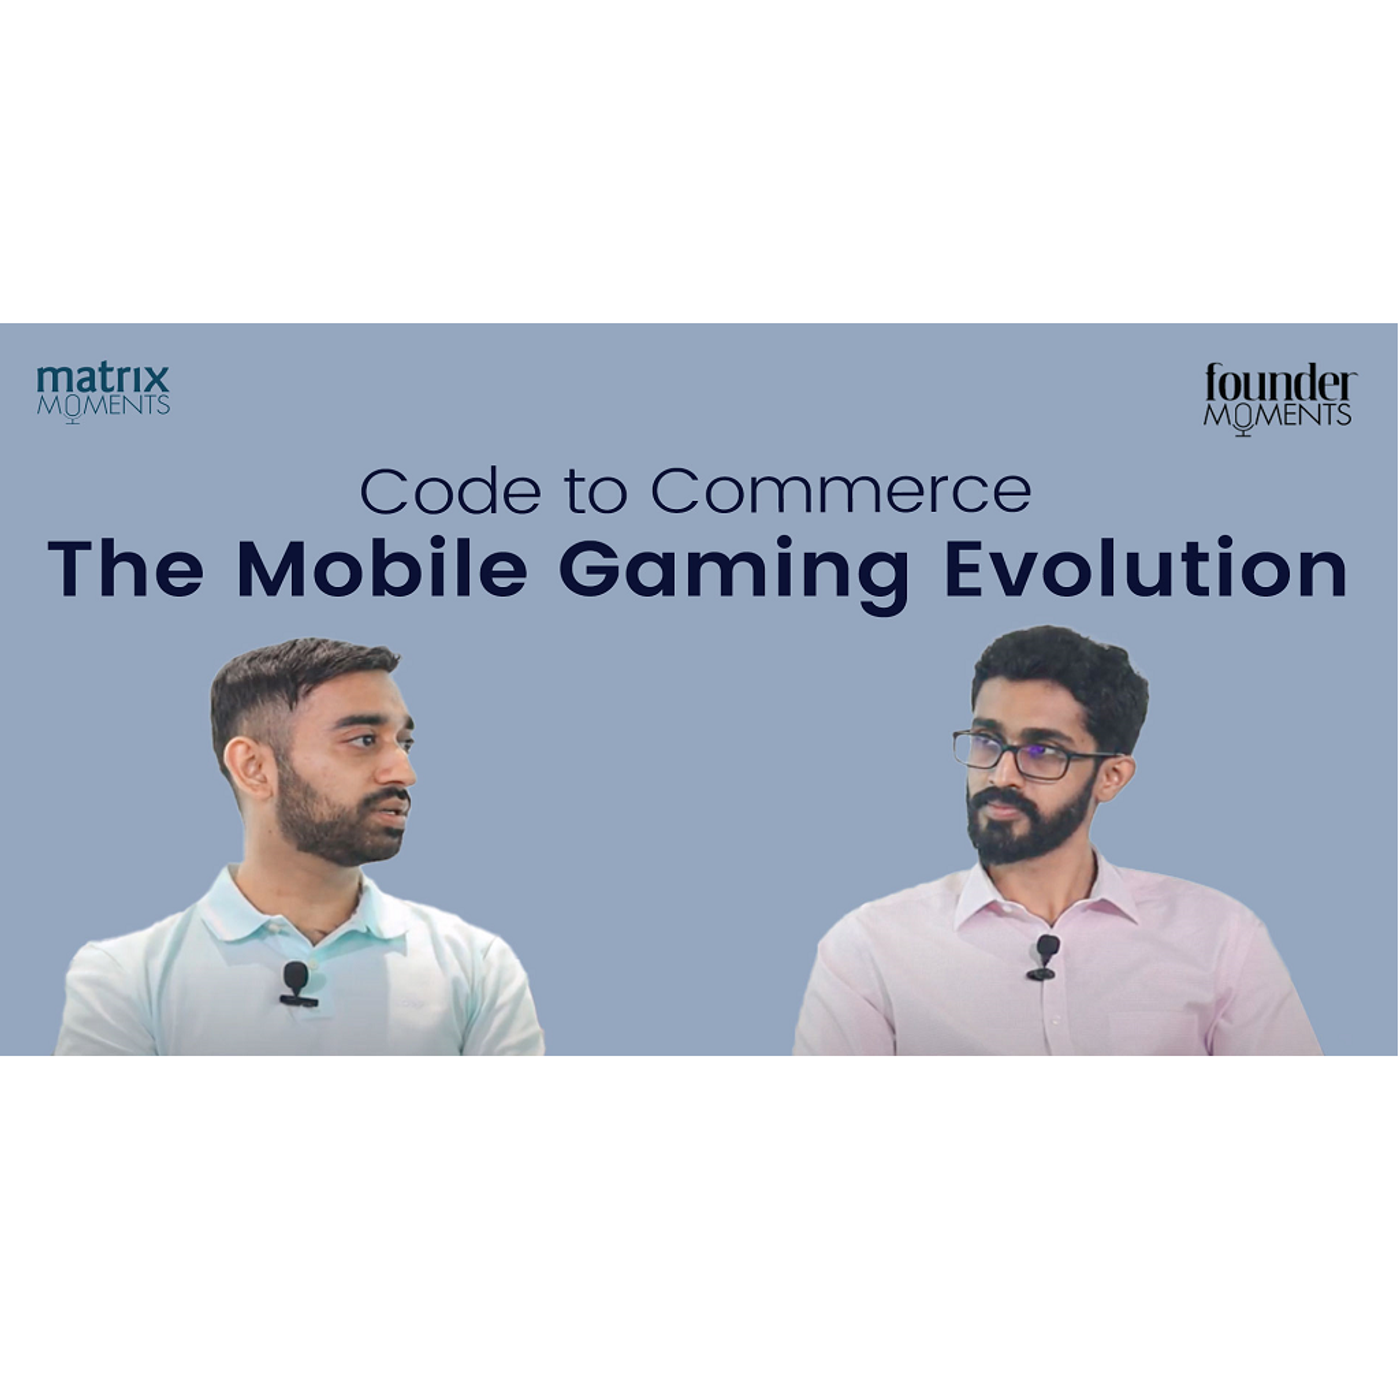 180: Matrix Moments: Code to Commerce - The Mobile Gaming Evolution